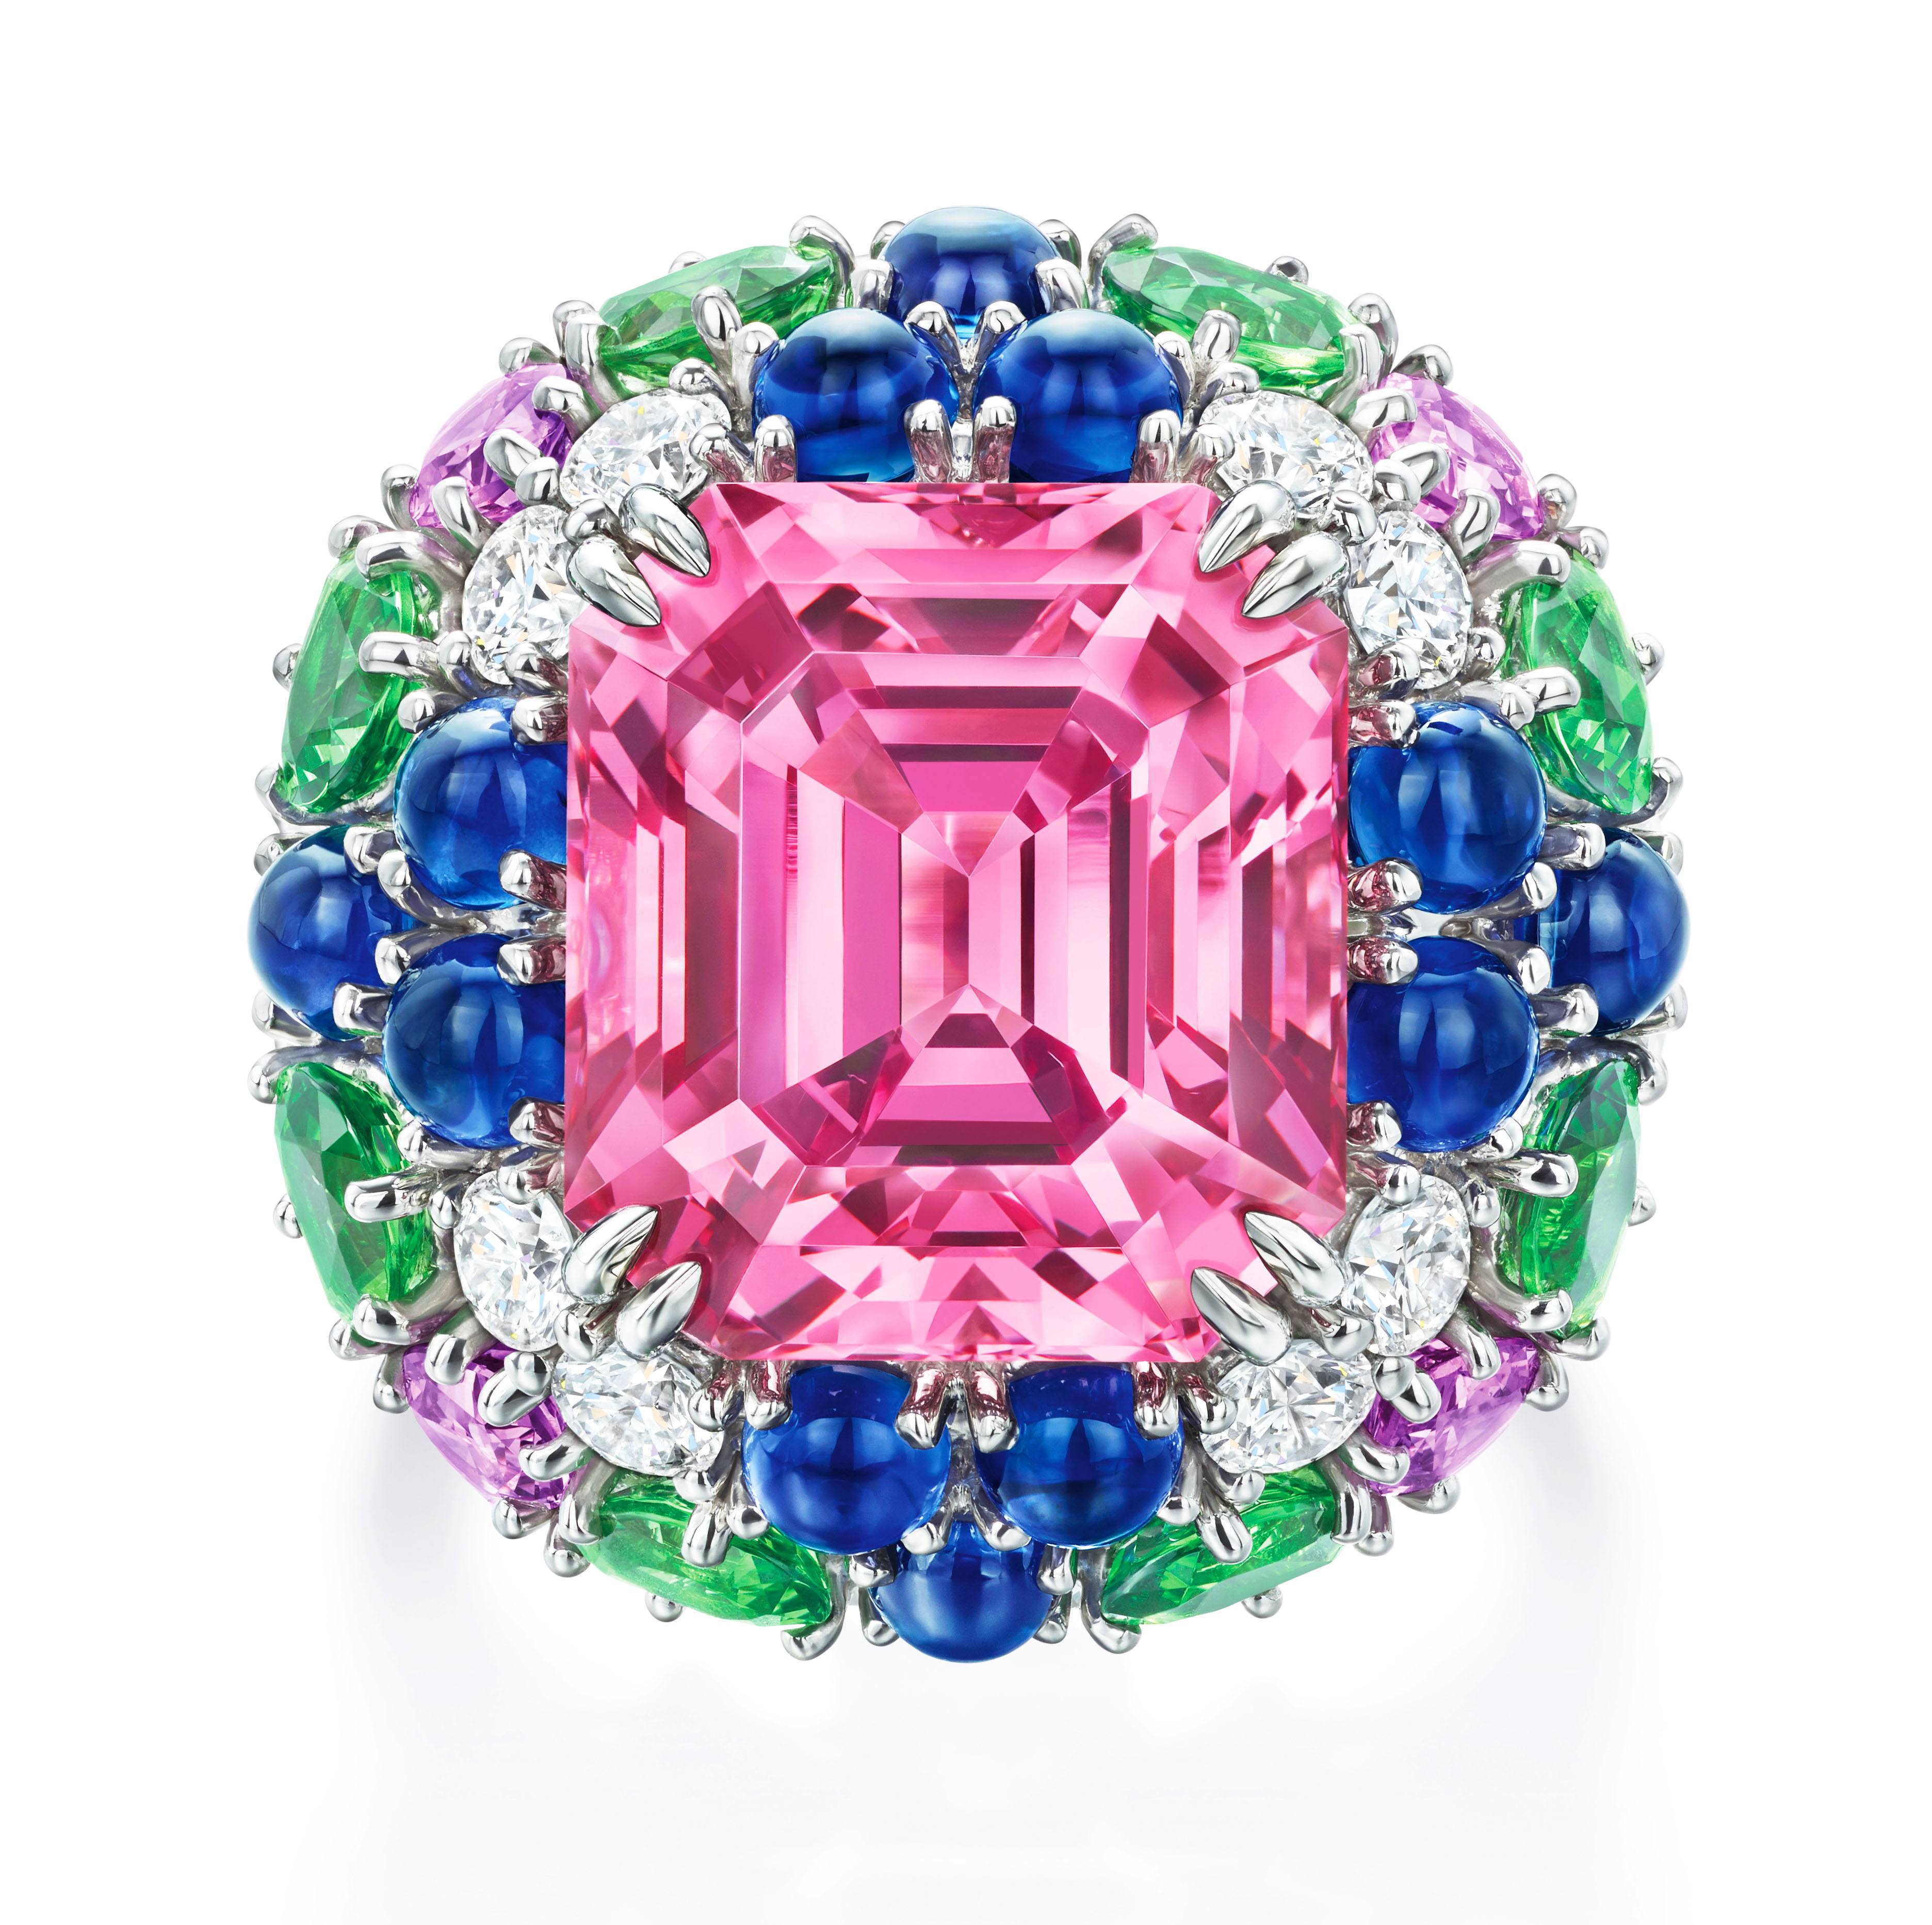 Limited Edition Harry Winston pink Pink Spinel Ring with Tsavorite Garnets, multi-colored Sapphires and Diamonds from the Candy Collection